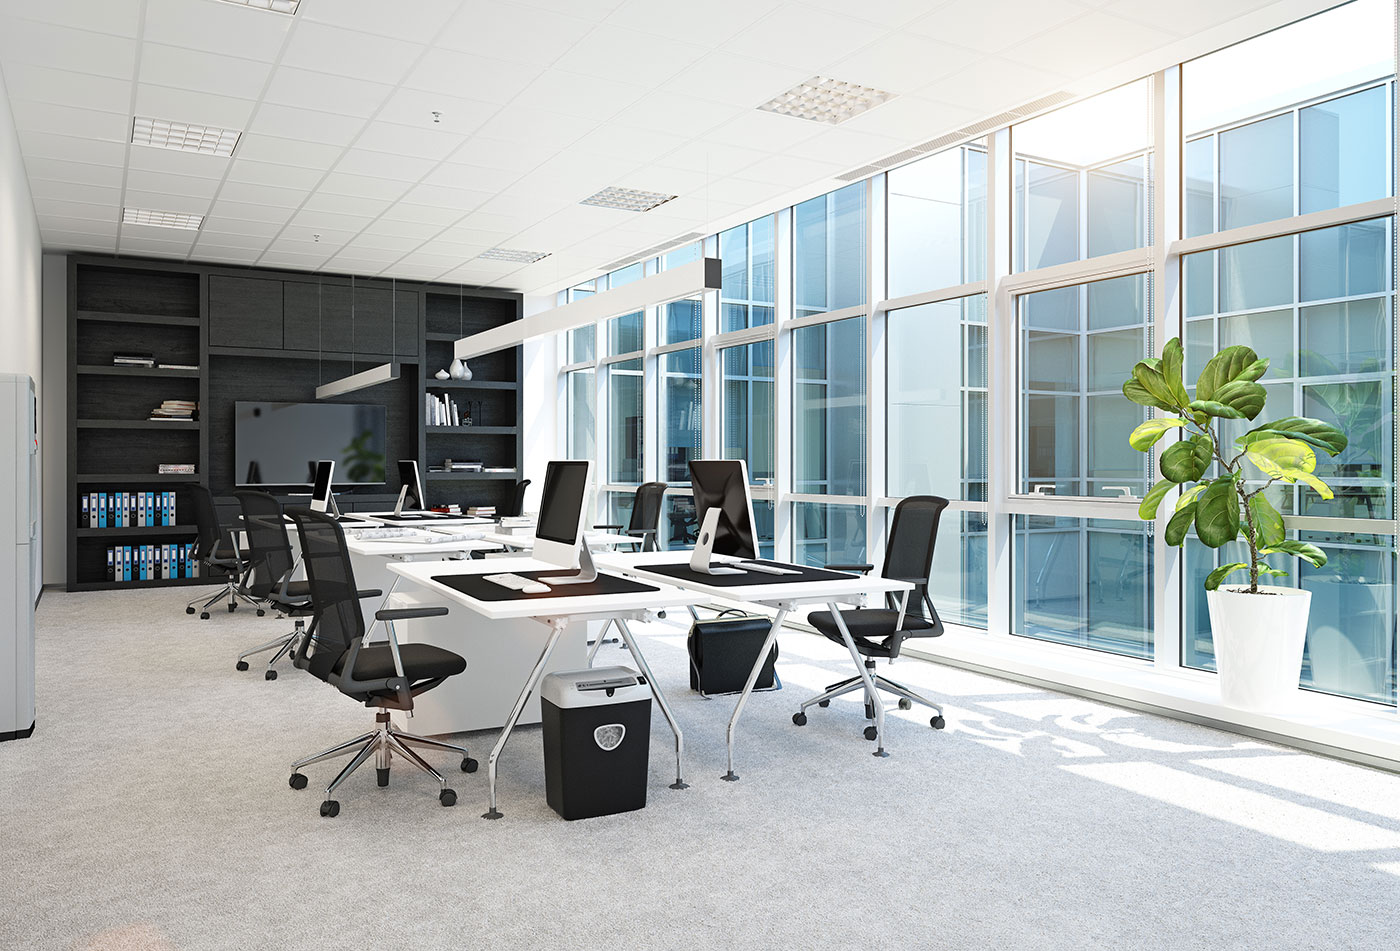 Main image for AA Business Furniture - Office Furniture Southampton